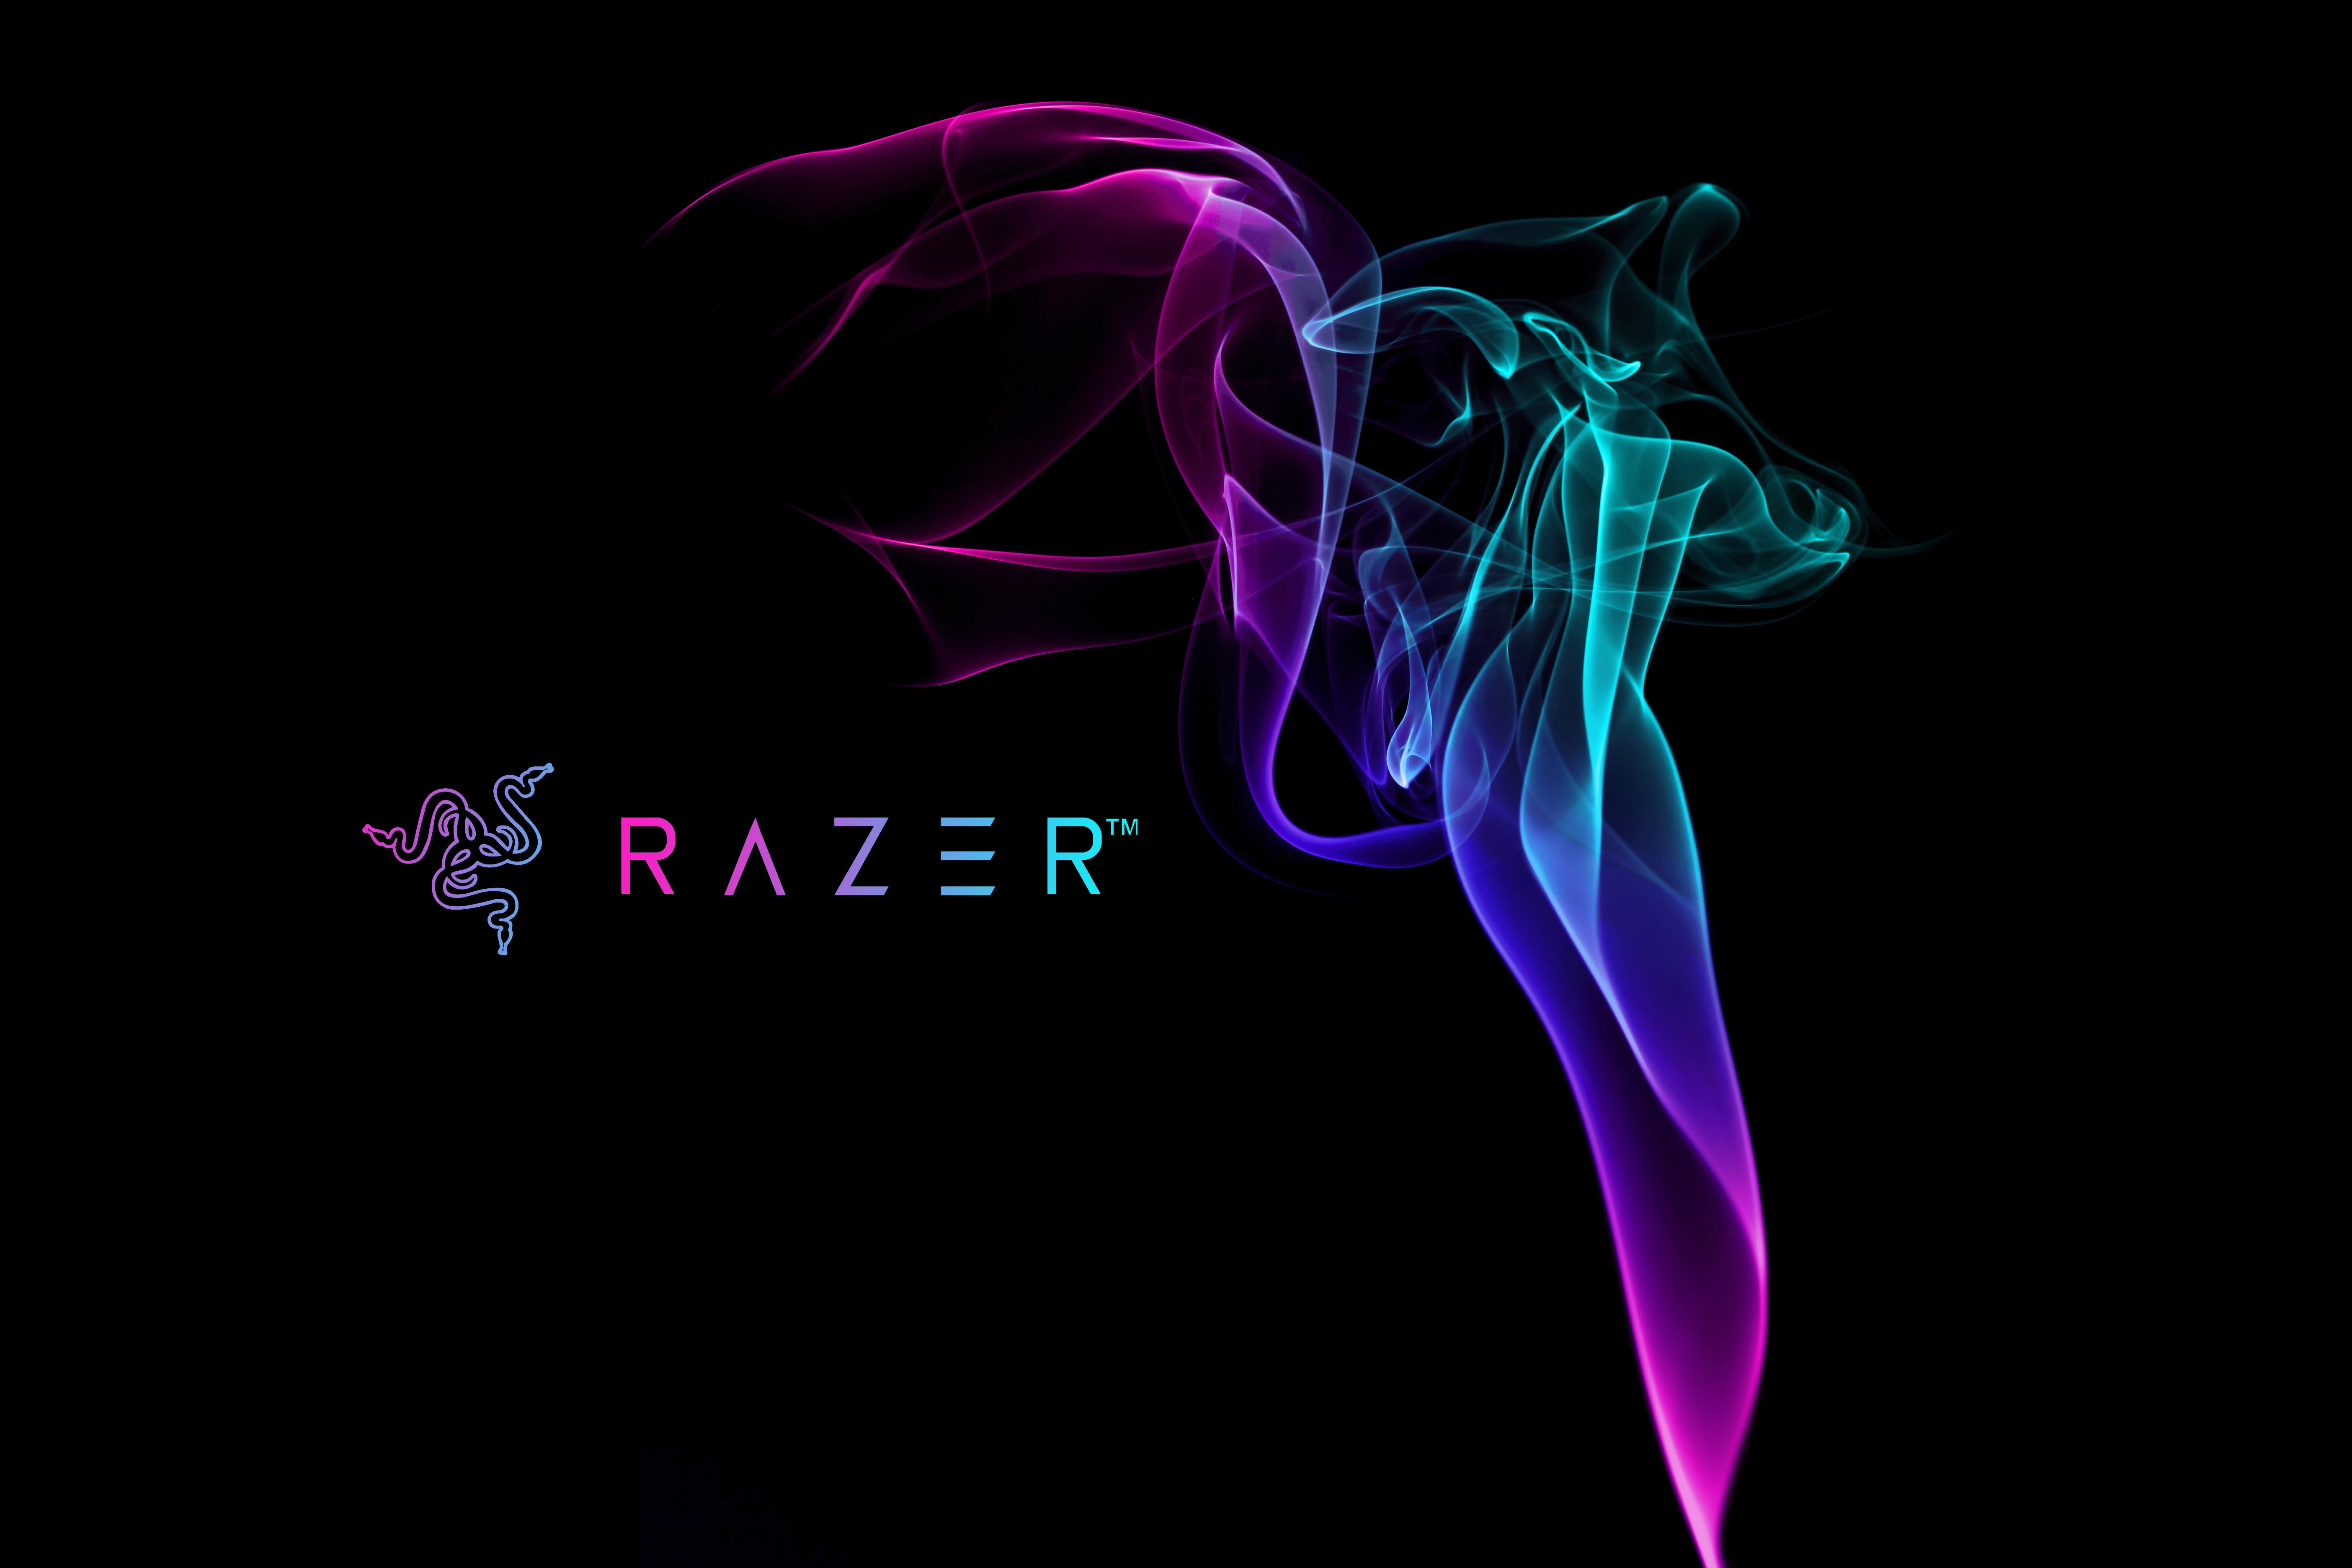 Another wallpaper i made tell me your thought or if you have any questions about it rrazer